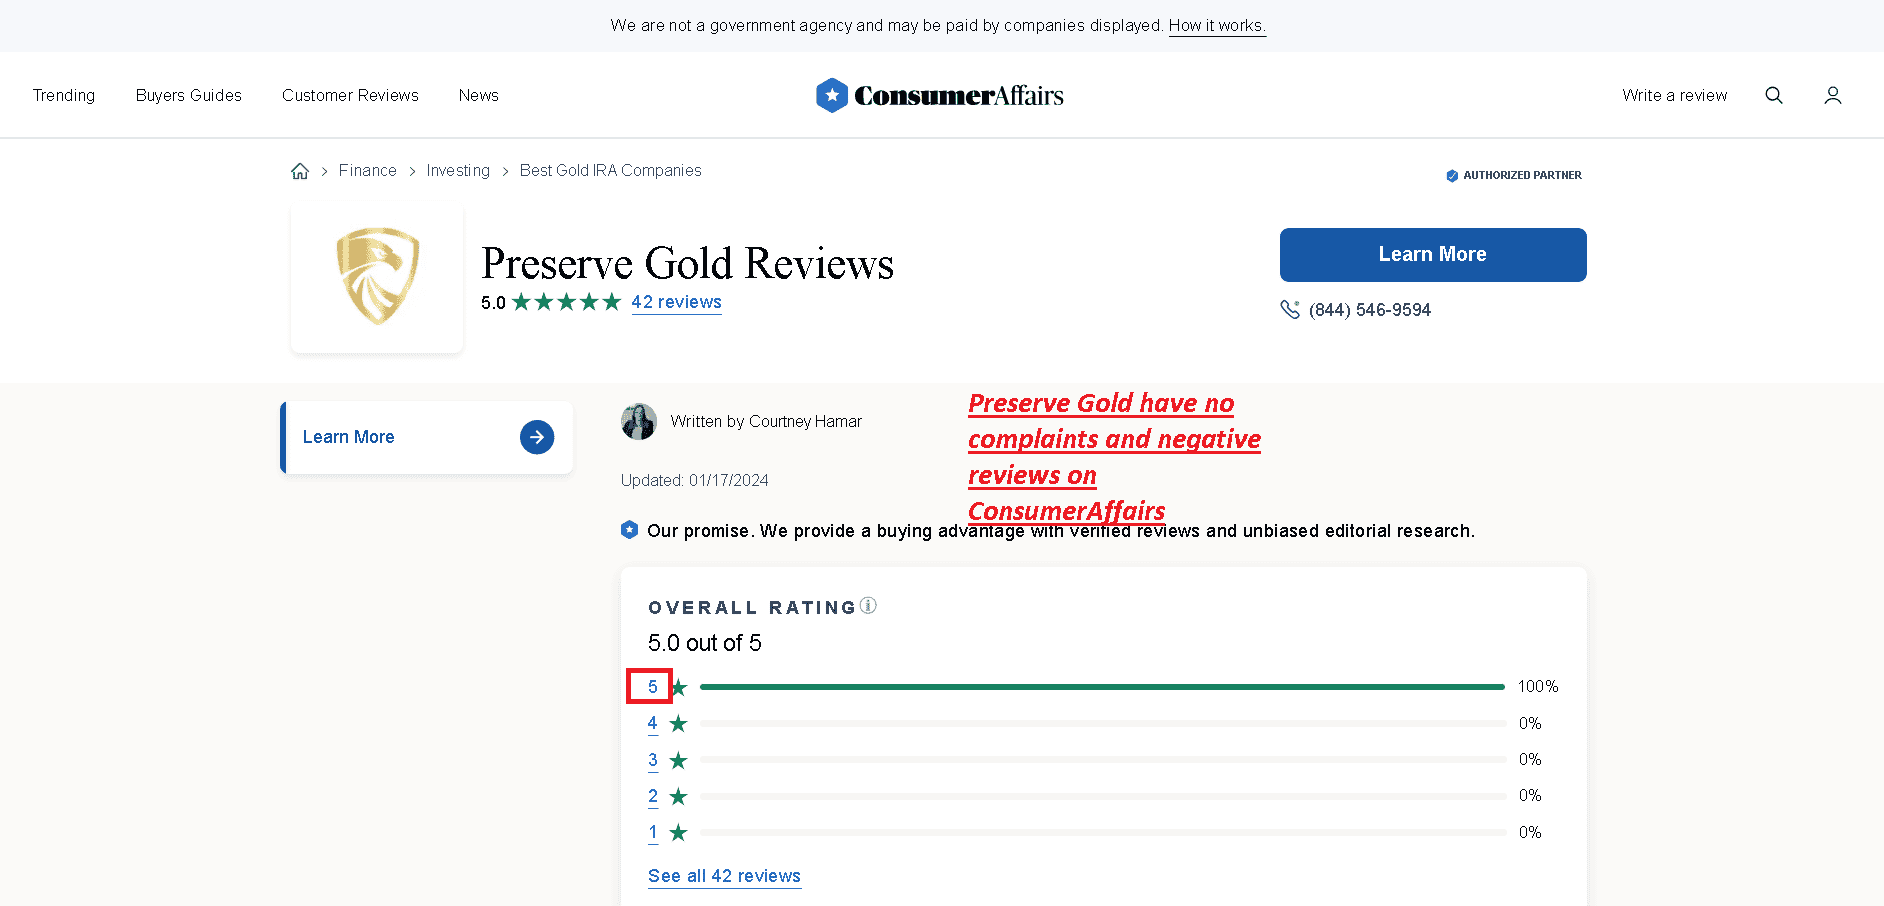 Preserve Gold have no complaints and negative reviews on ConsumerAffairs